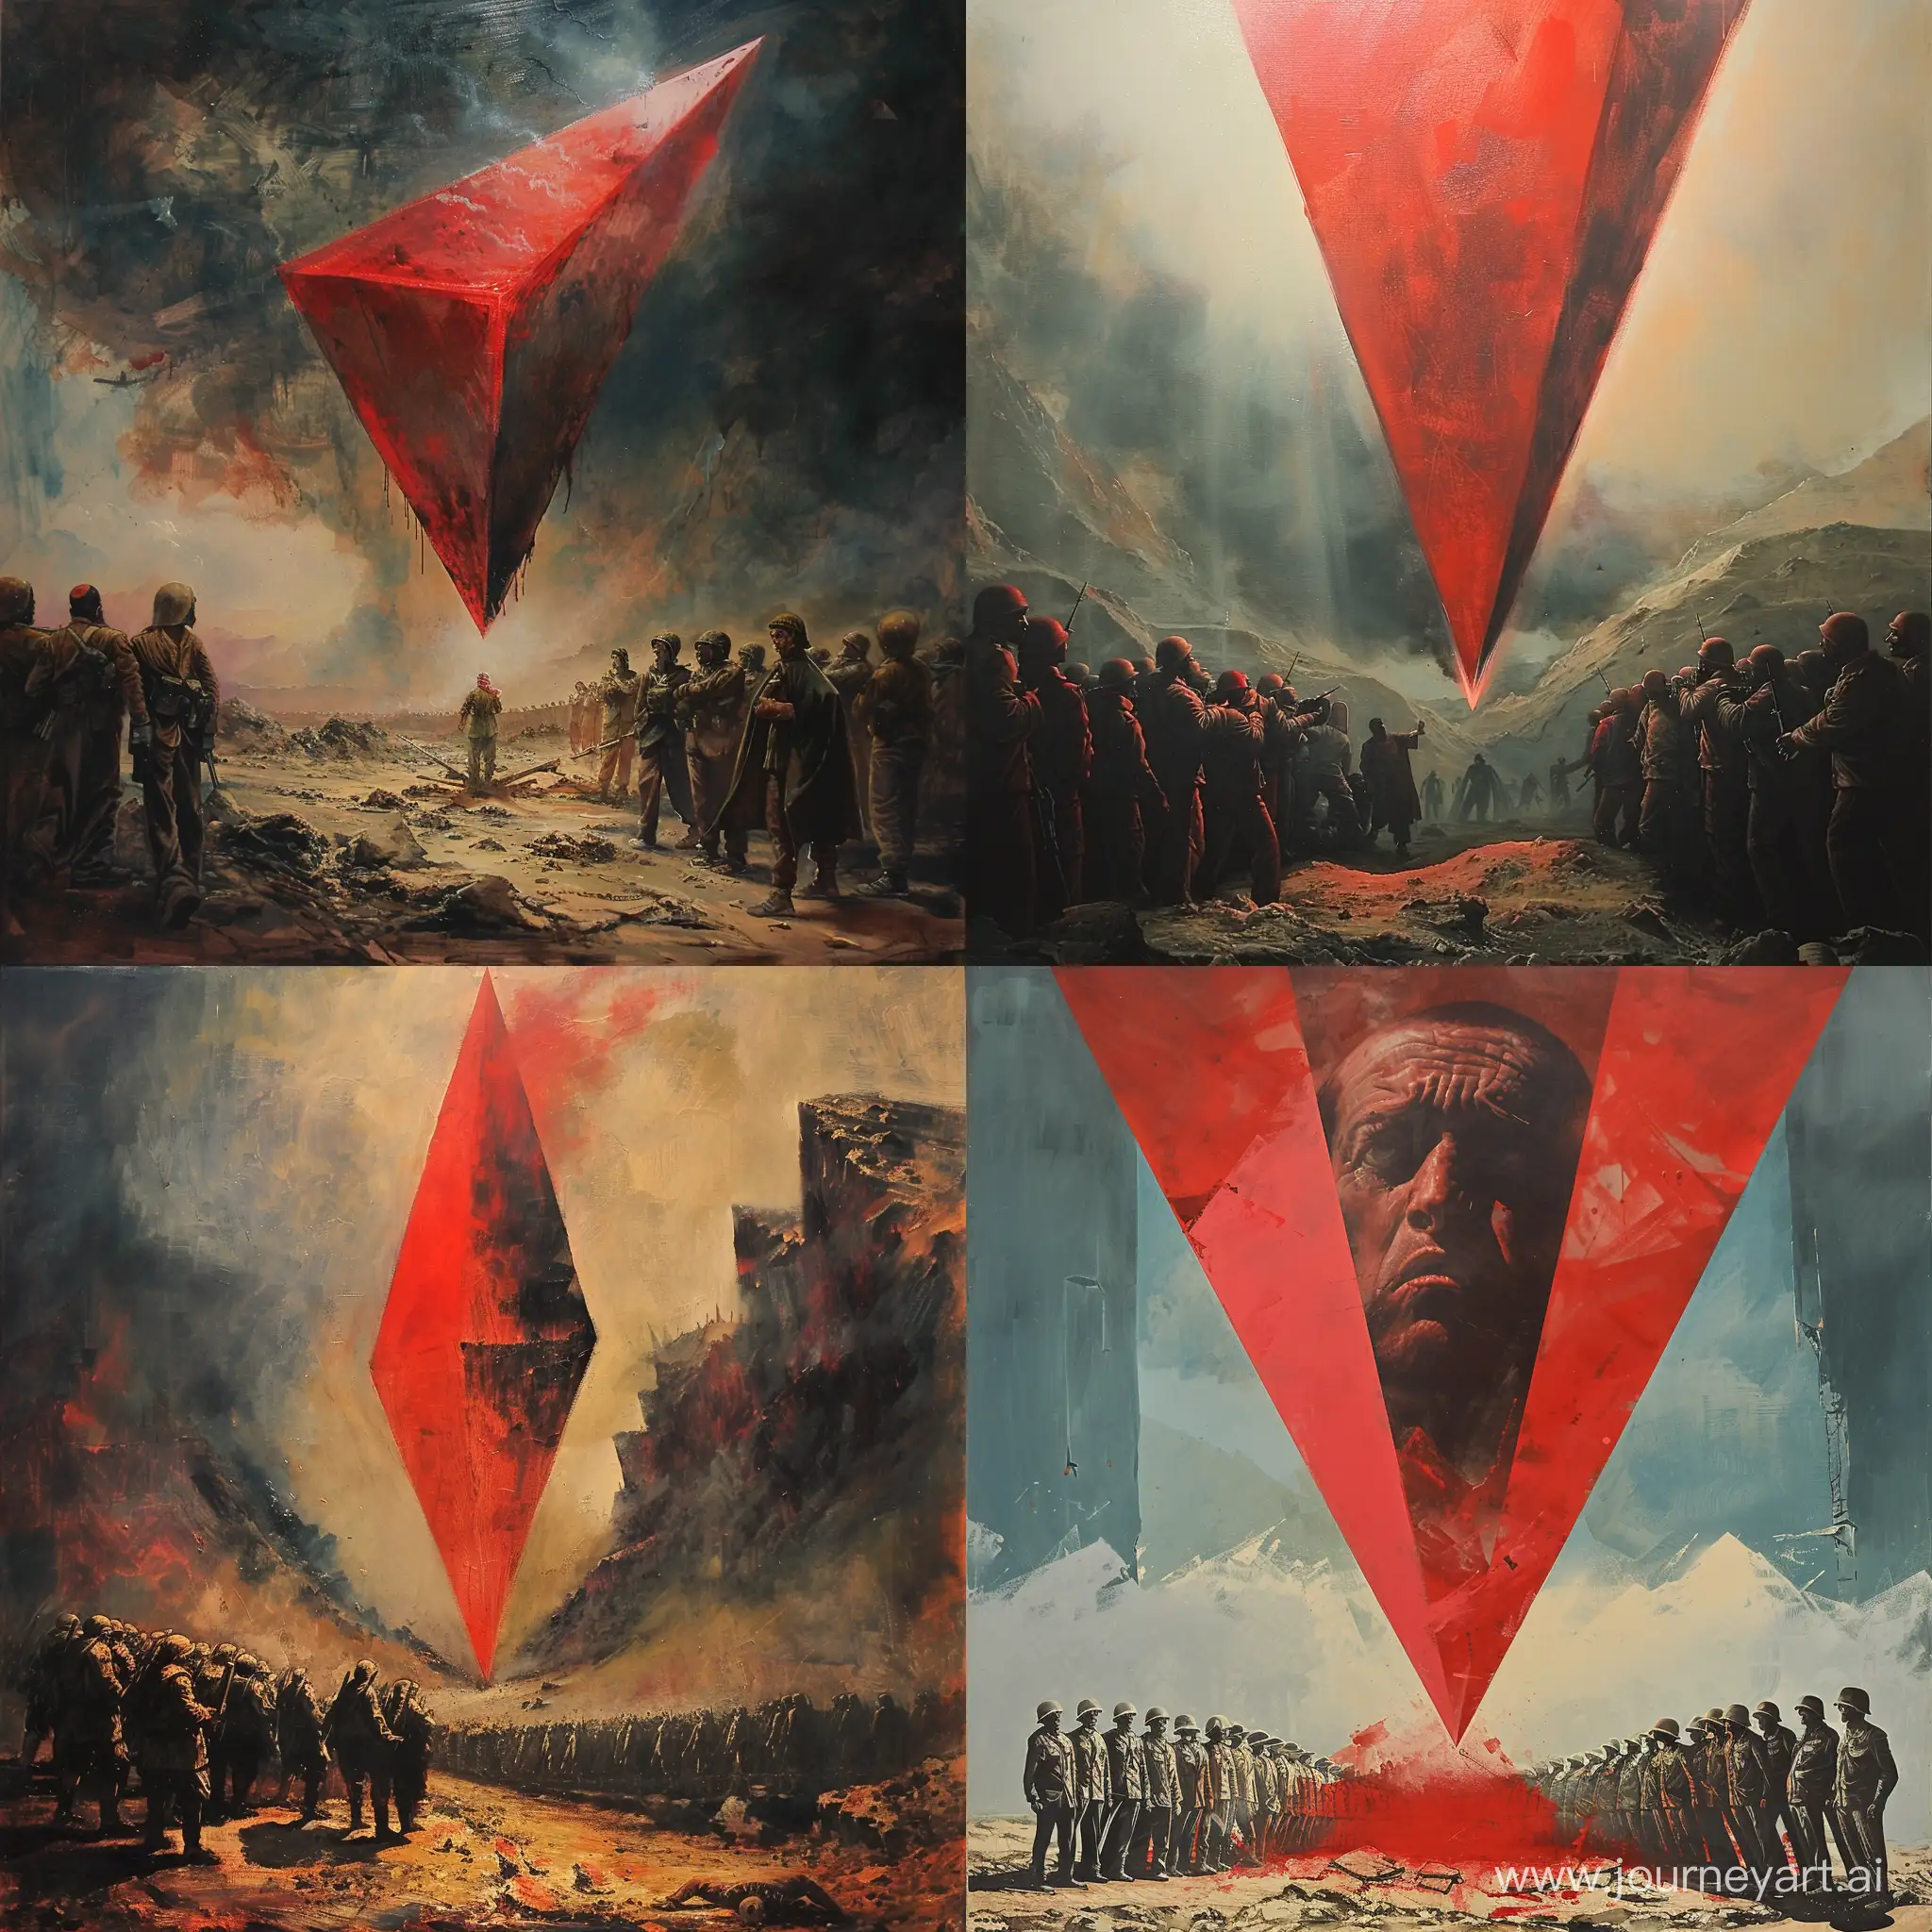 An artistic painting showing the descent of a large red triangle from the sky, symbolizing Palestinian resistance and expressing victory over the oppressors. Its head is down and its base is up. The tip of the triangle is planted in the ground.
He is surrounded by a group of evil soldiers who look at him in a state of panic and fear.